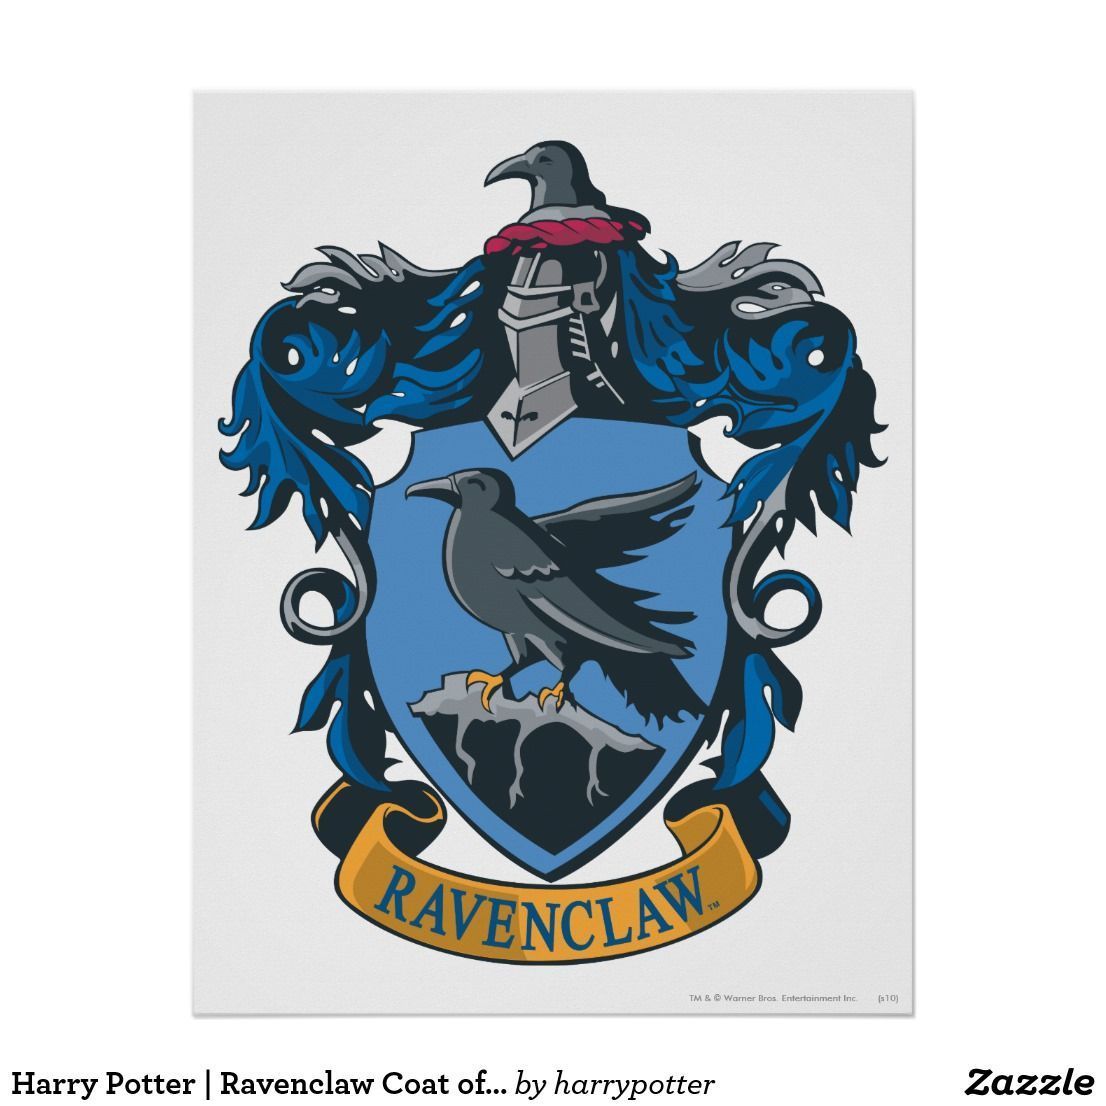 Harry Potter. Ravenclaw Coat of Arms Poster #harrypotter